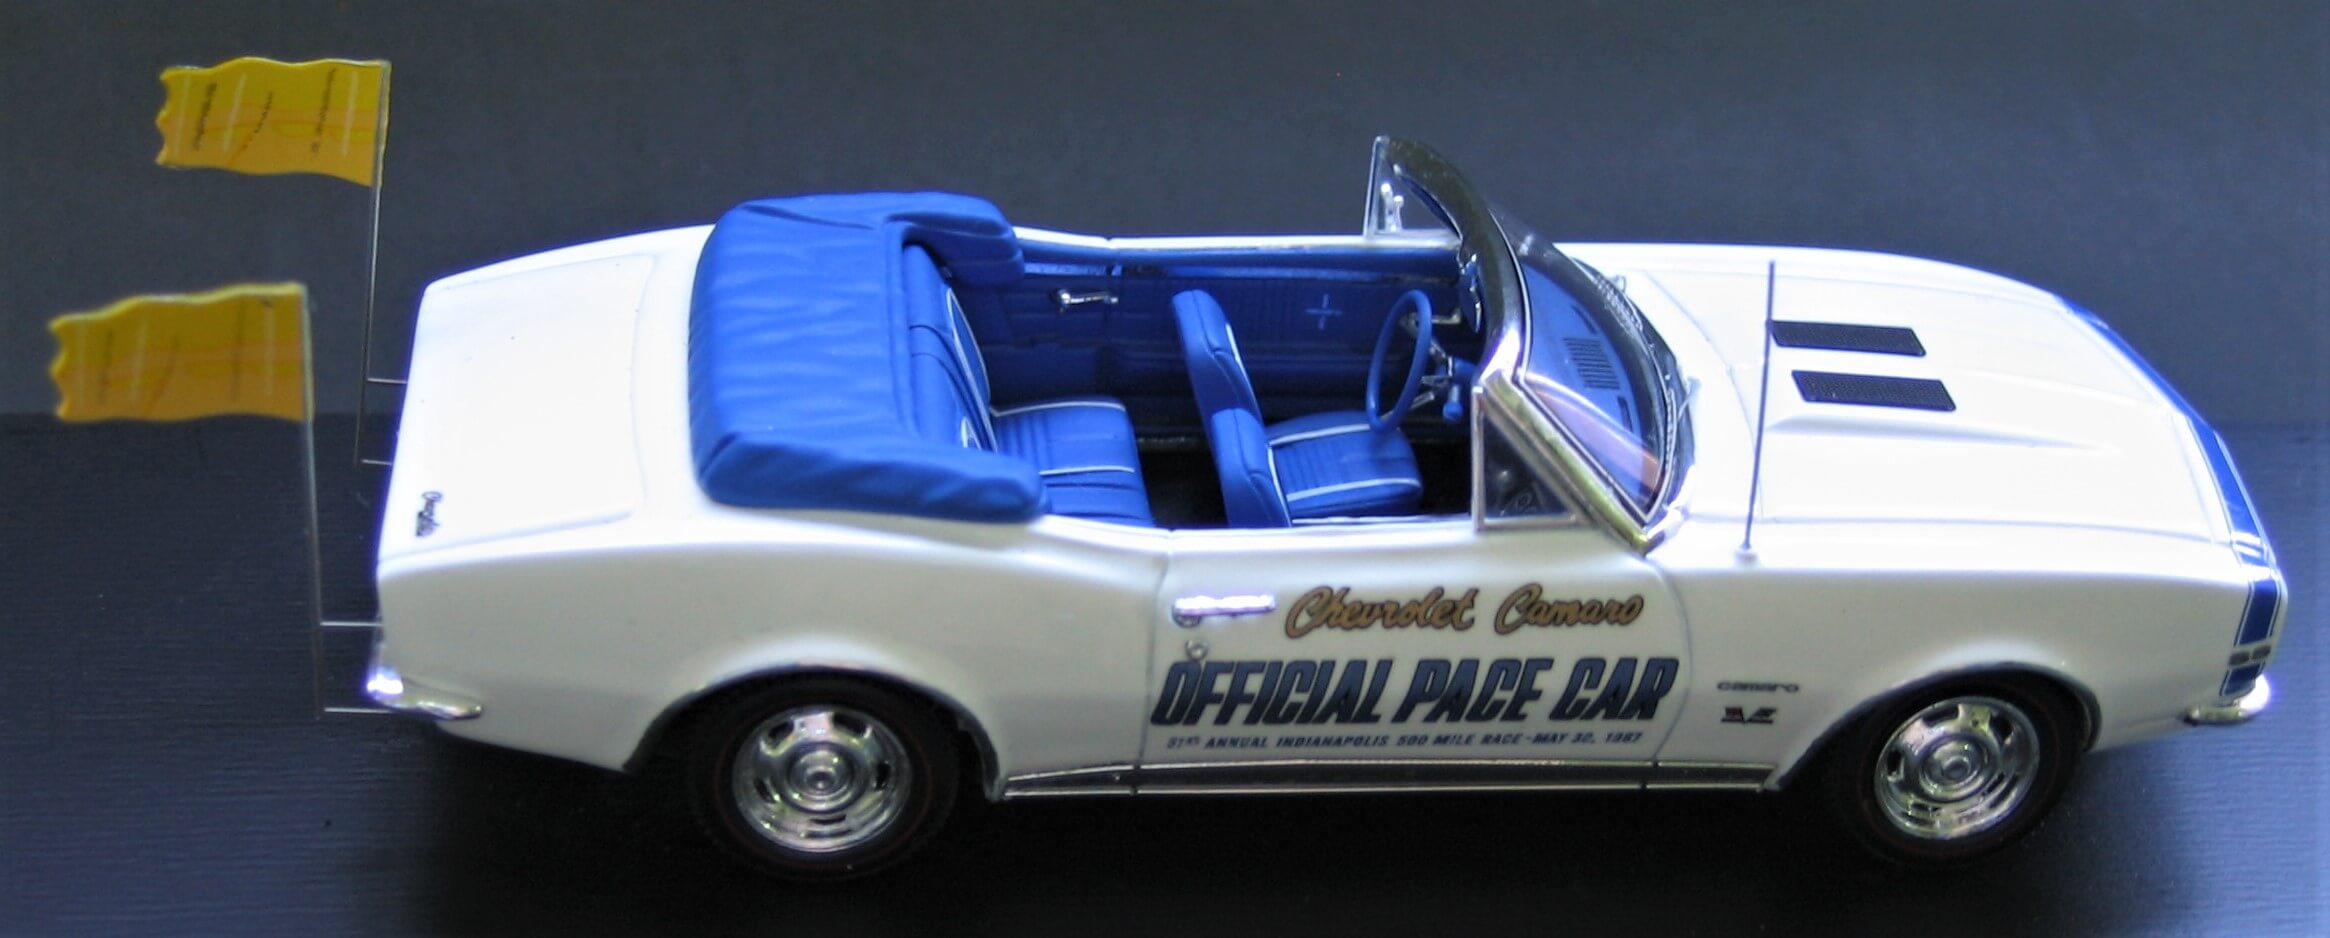 Chevrolet Camaro Pace car 1967 Indy 500